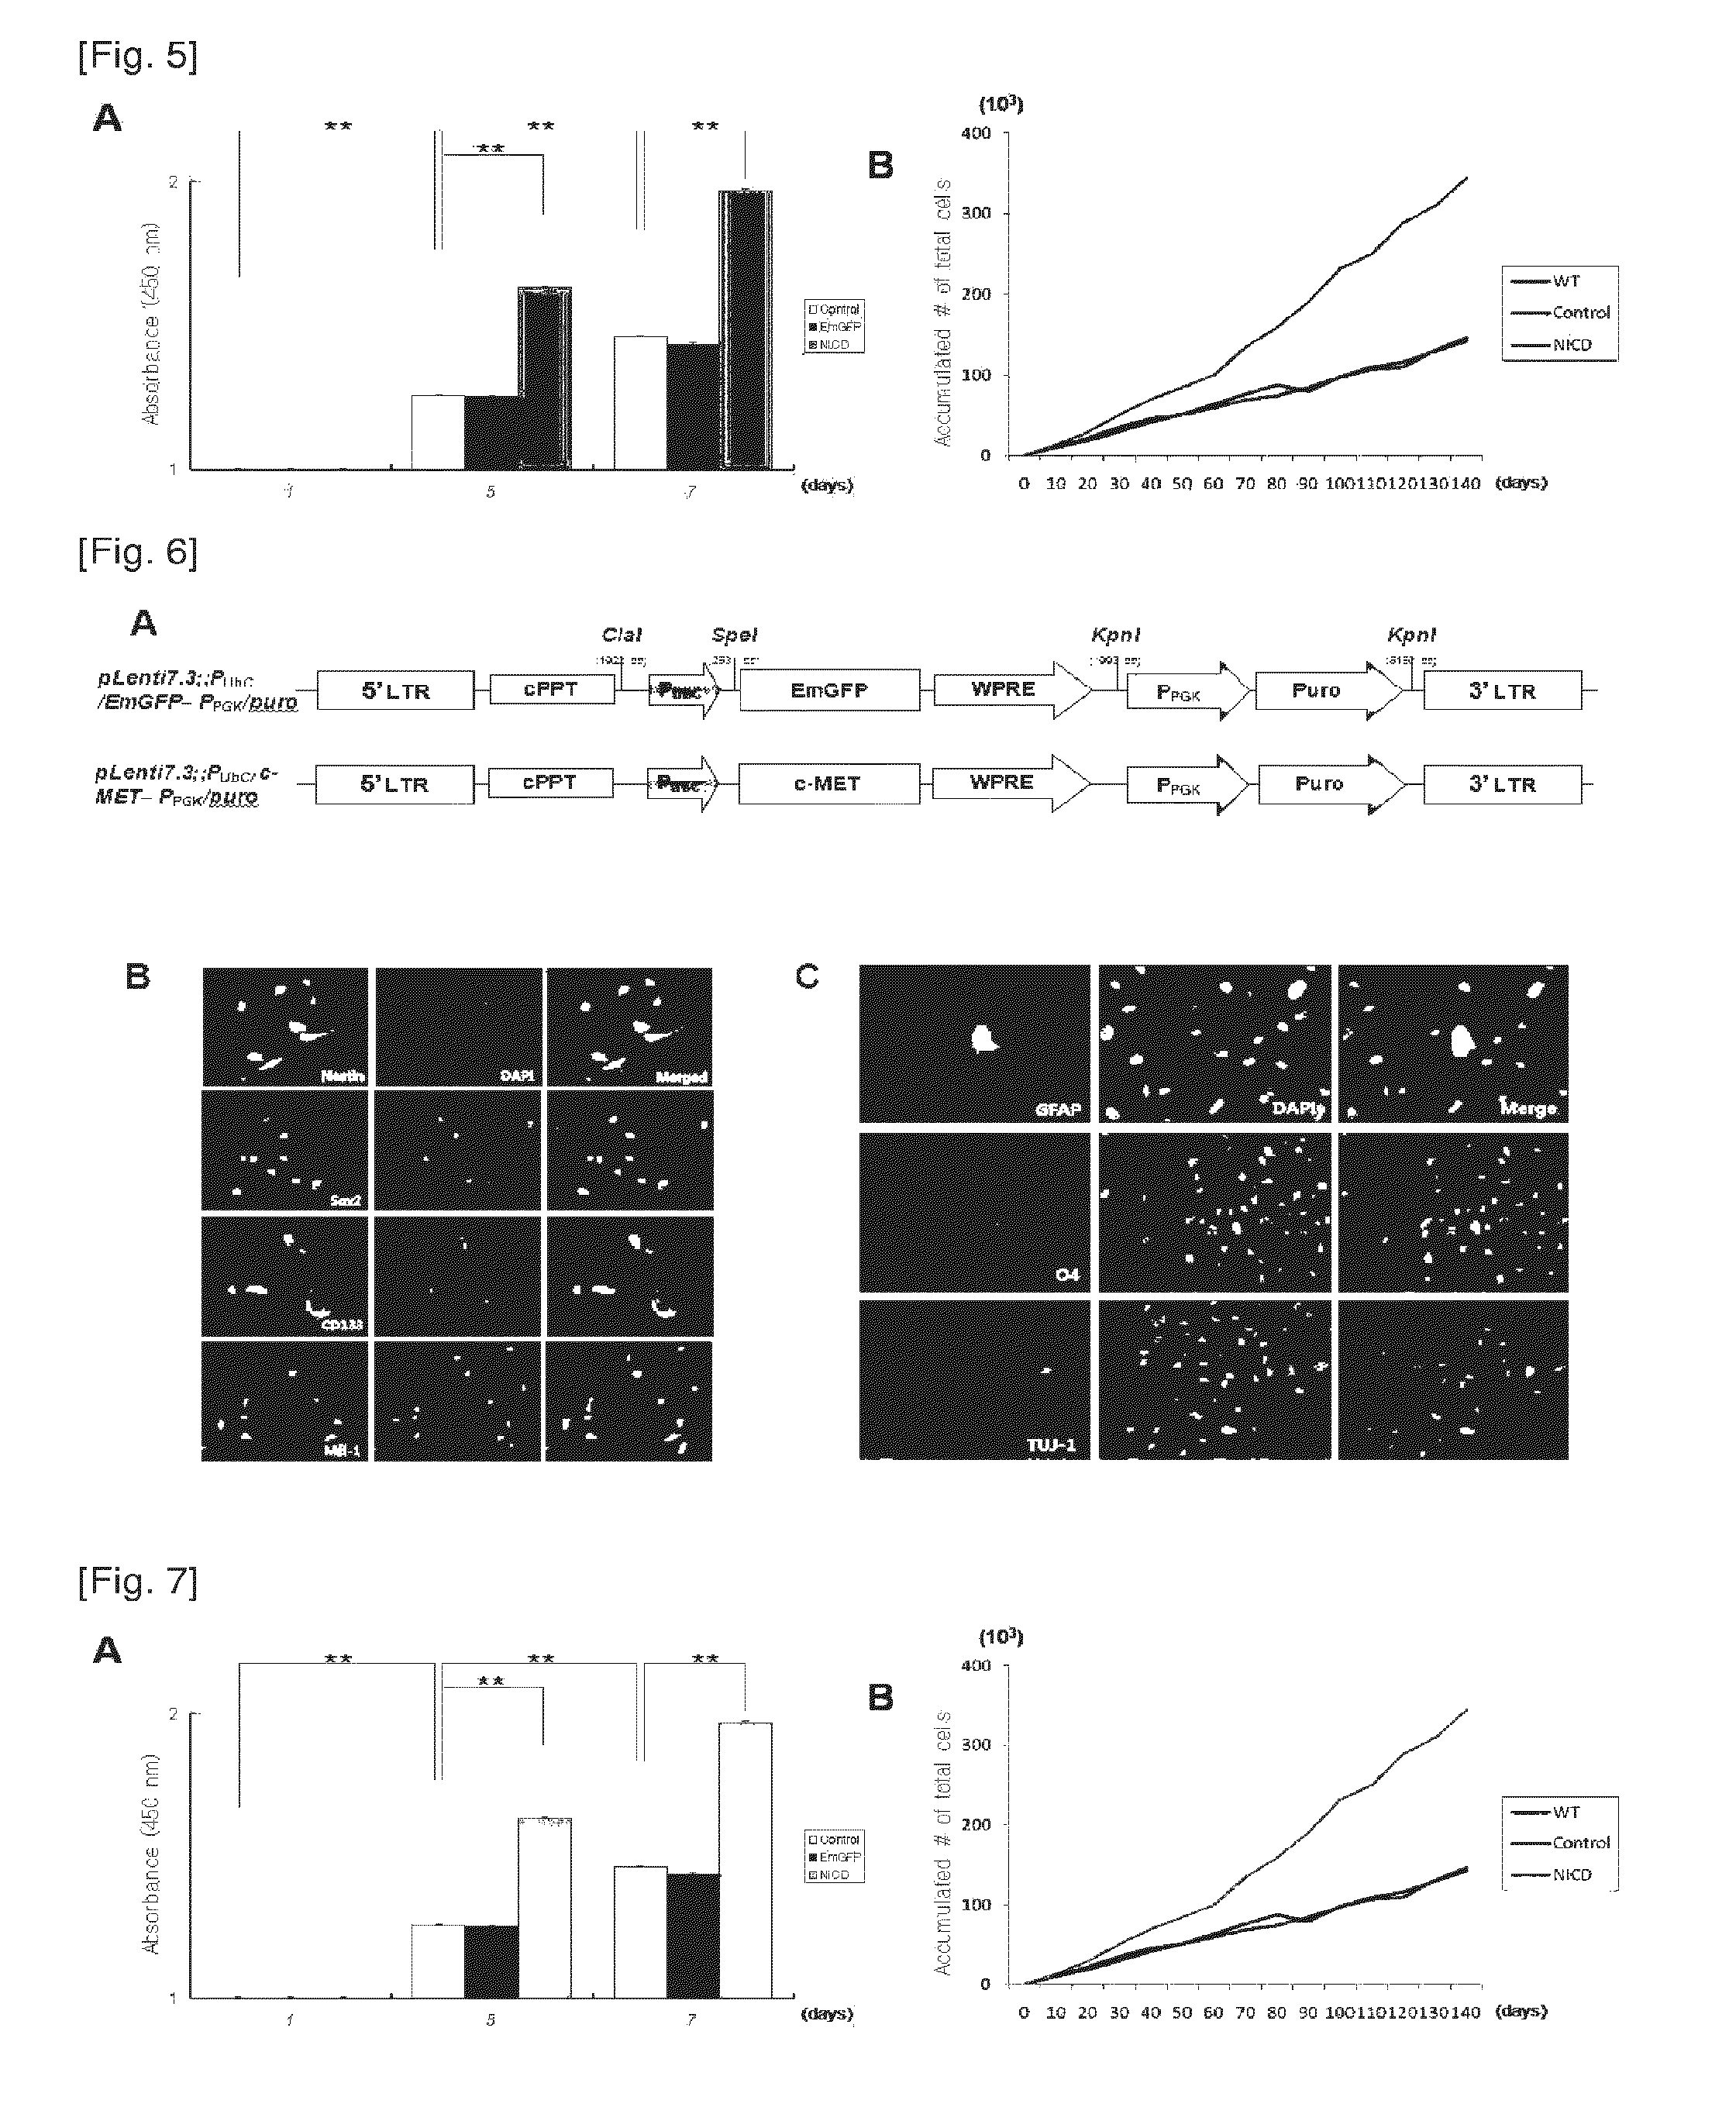 Method for proliferating stem cells by activating c-met/hgf signaling and notch signaling